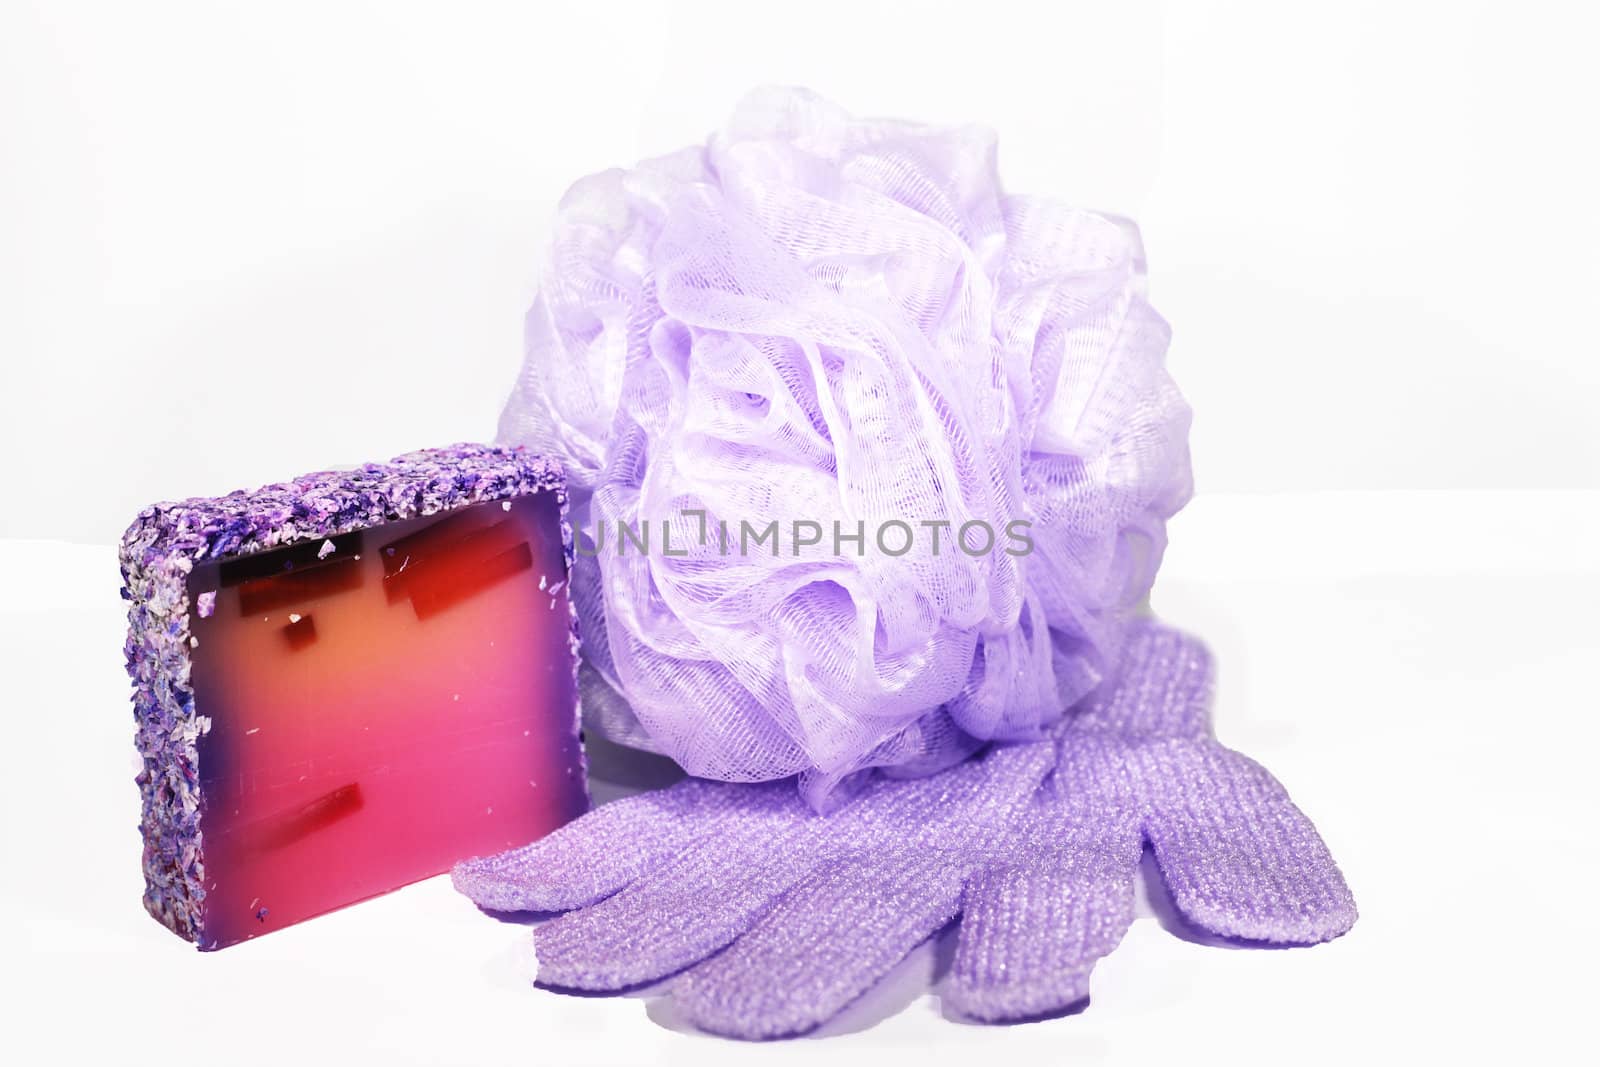 composition of sponge to wash,colored soaps and shampoo  bottle